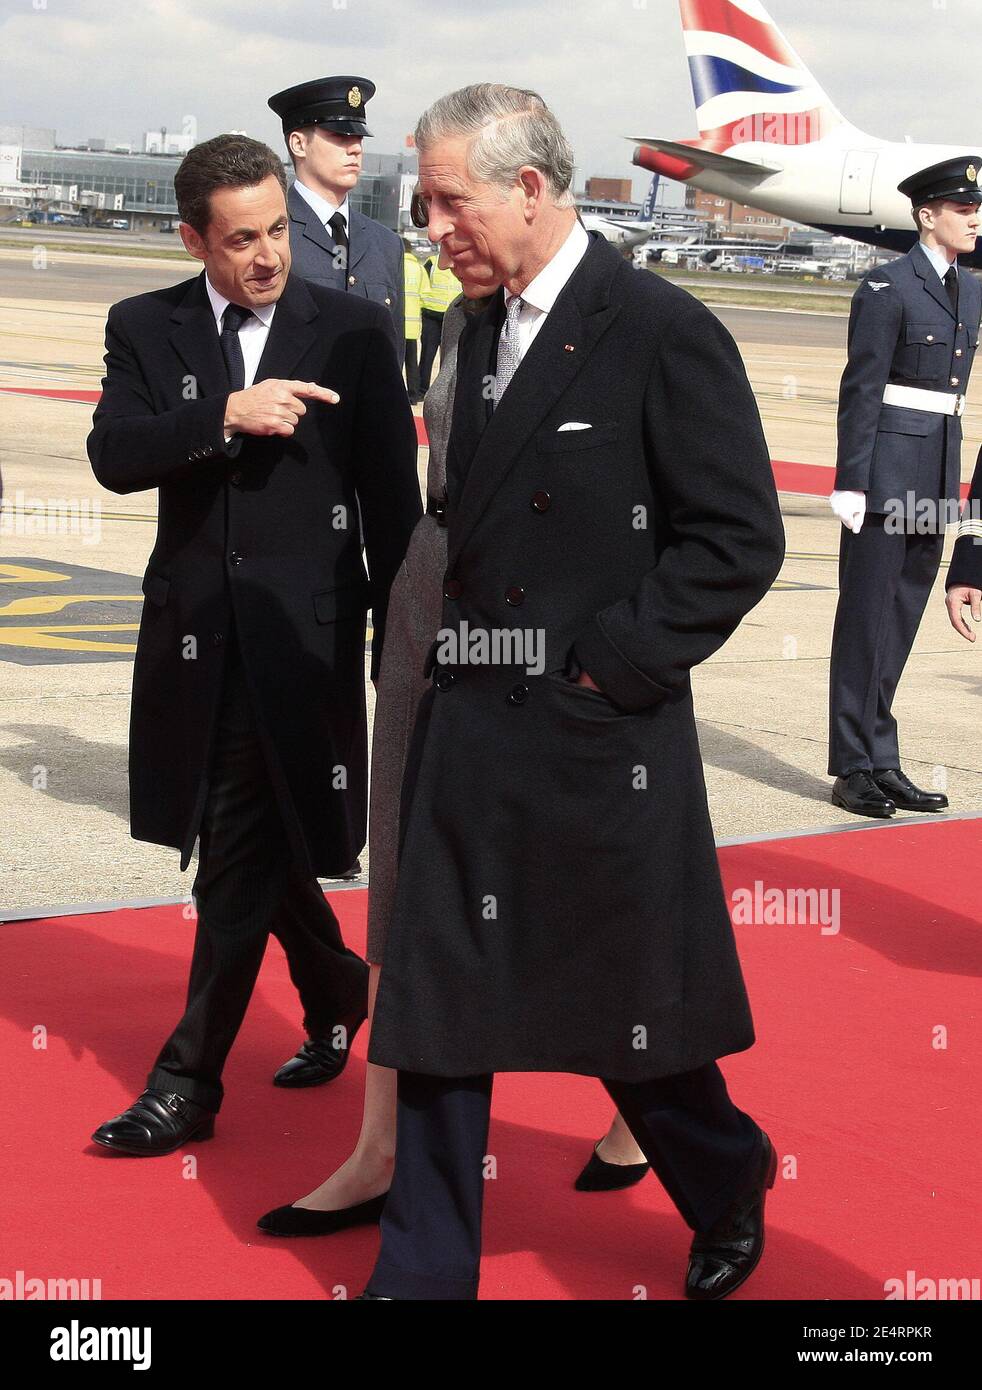 French President Nicolas Sarkozy and Carla Bruni-Sarkozy welcomed by HRH Prince Charles of Wales at Heathrow airport in London , UK for state visit in England, on March 26, 2008. Photo by Olivier Sanchez Rocca/Pool/ABACAPRESS.COM Stock Photo